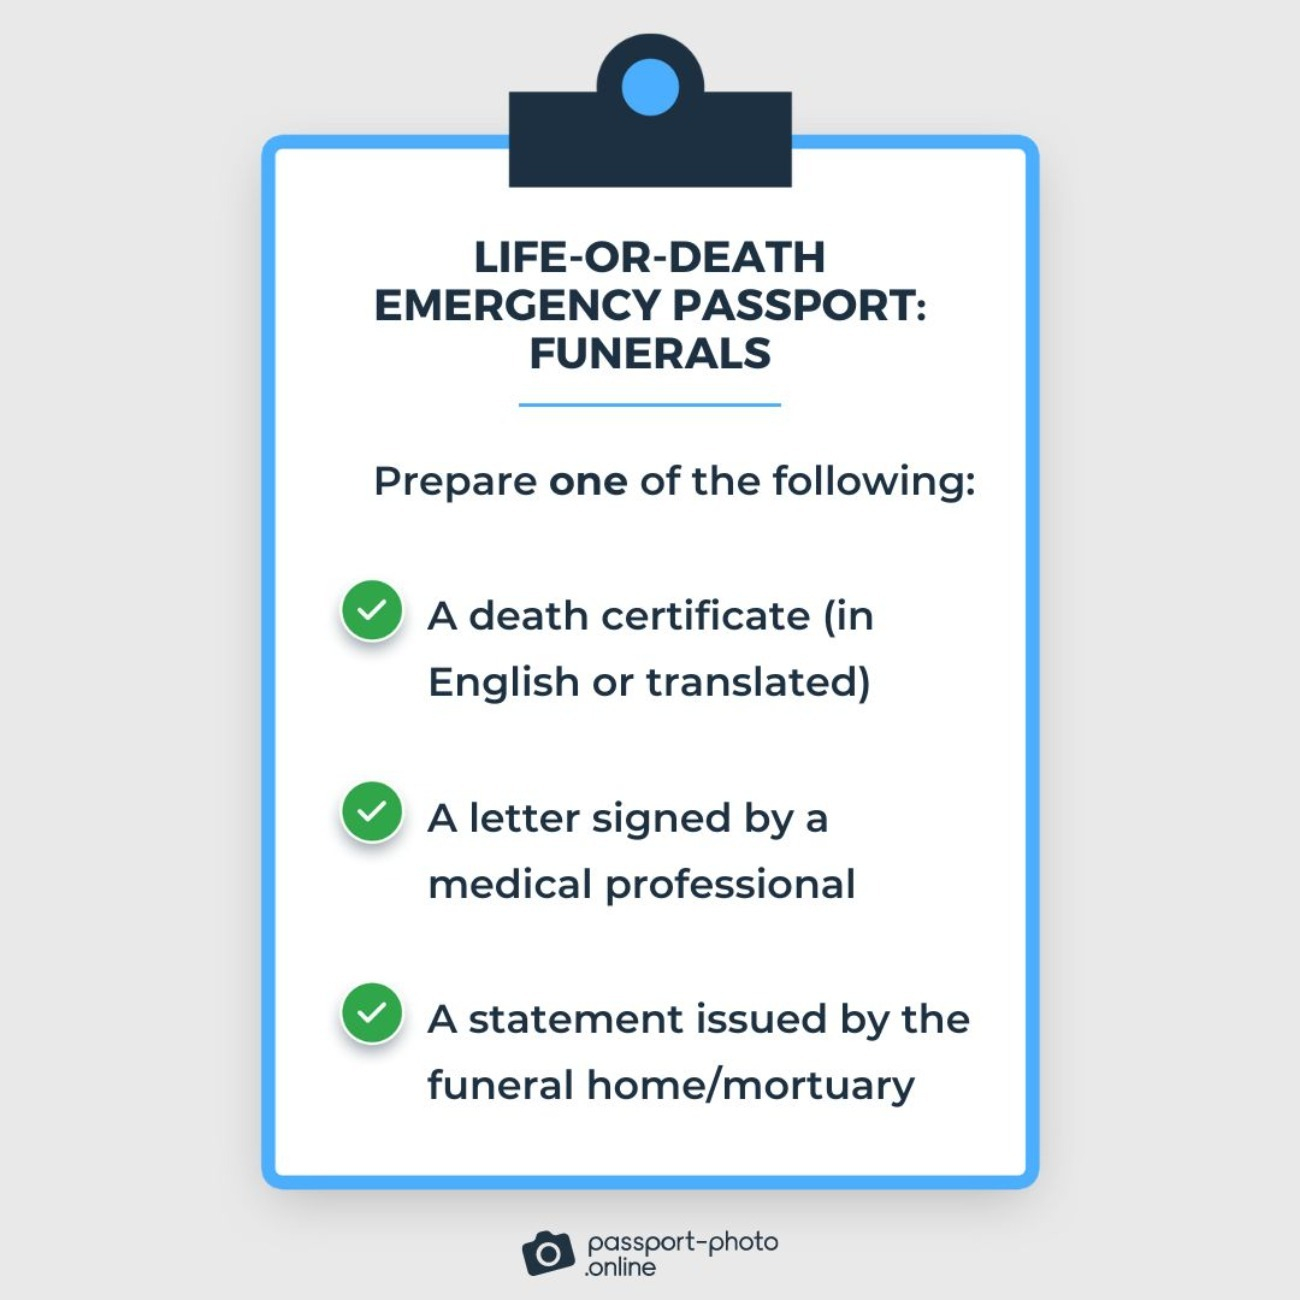 Documents needed to get a U.S. emergency passport in the case of funerals abroad